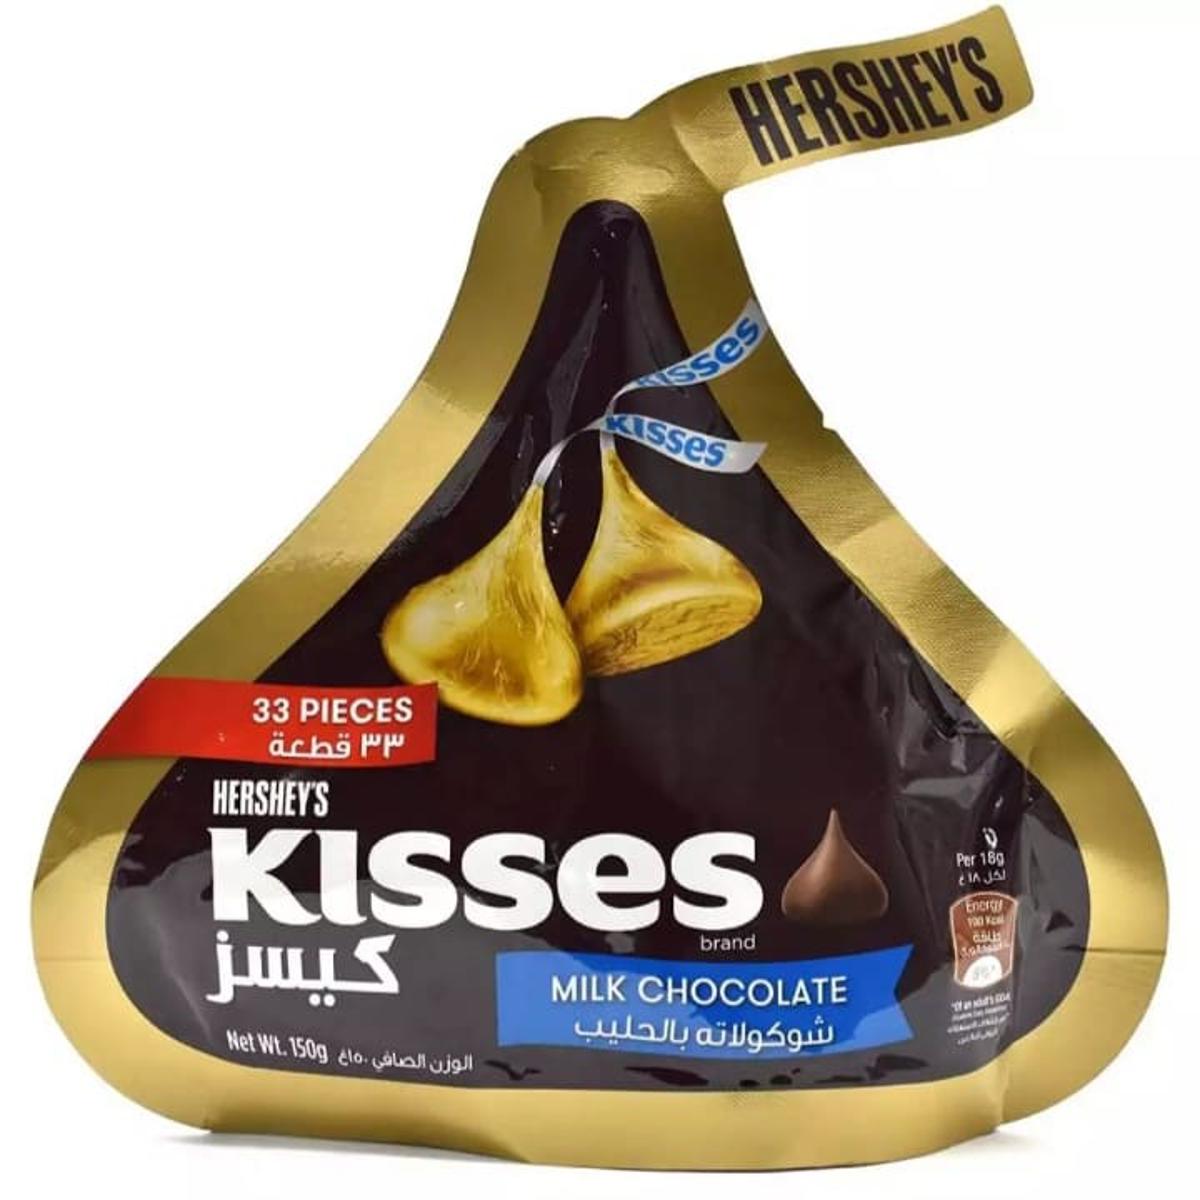 Hershey's Products at 25% Off on Daraz | Buy Online